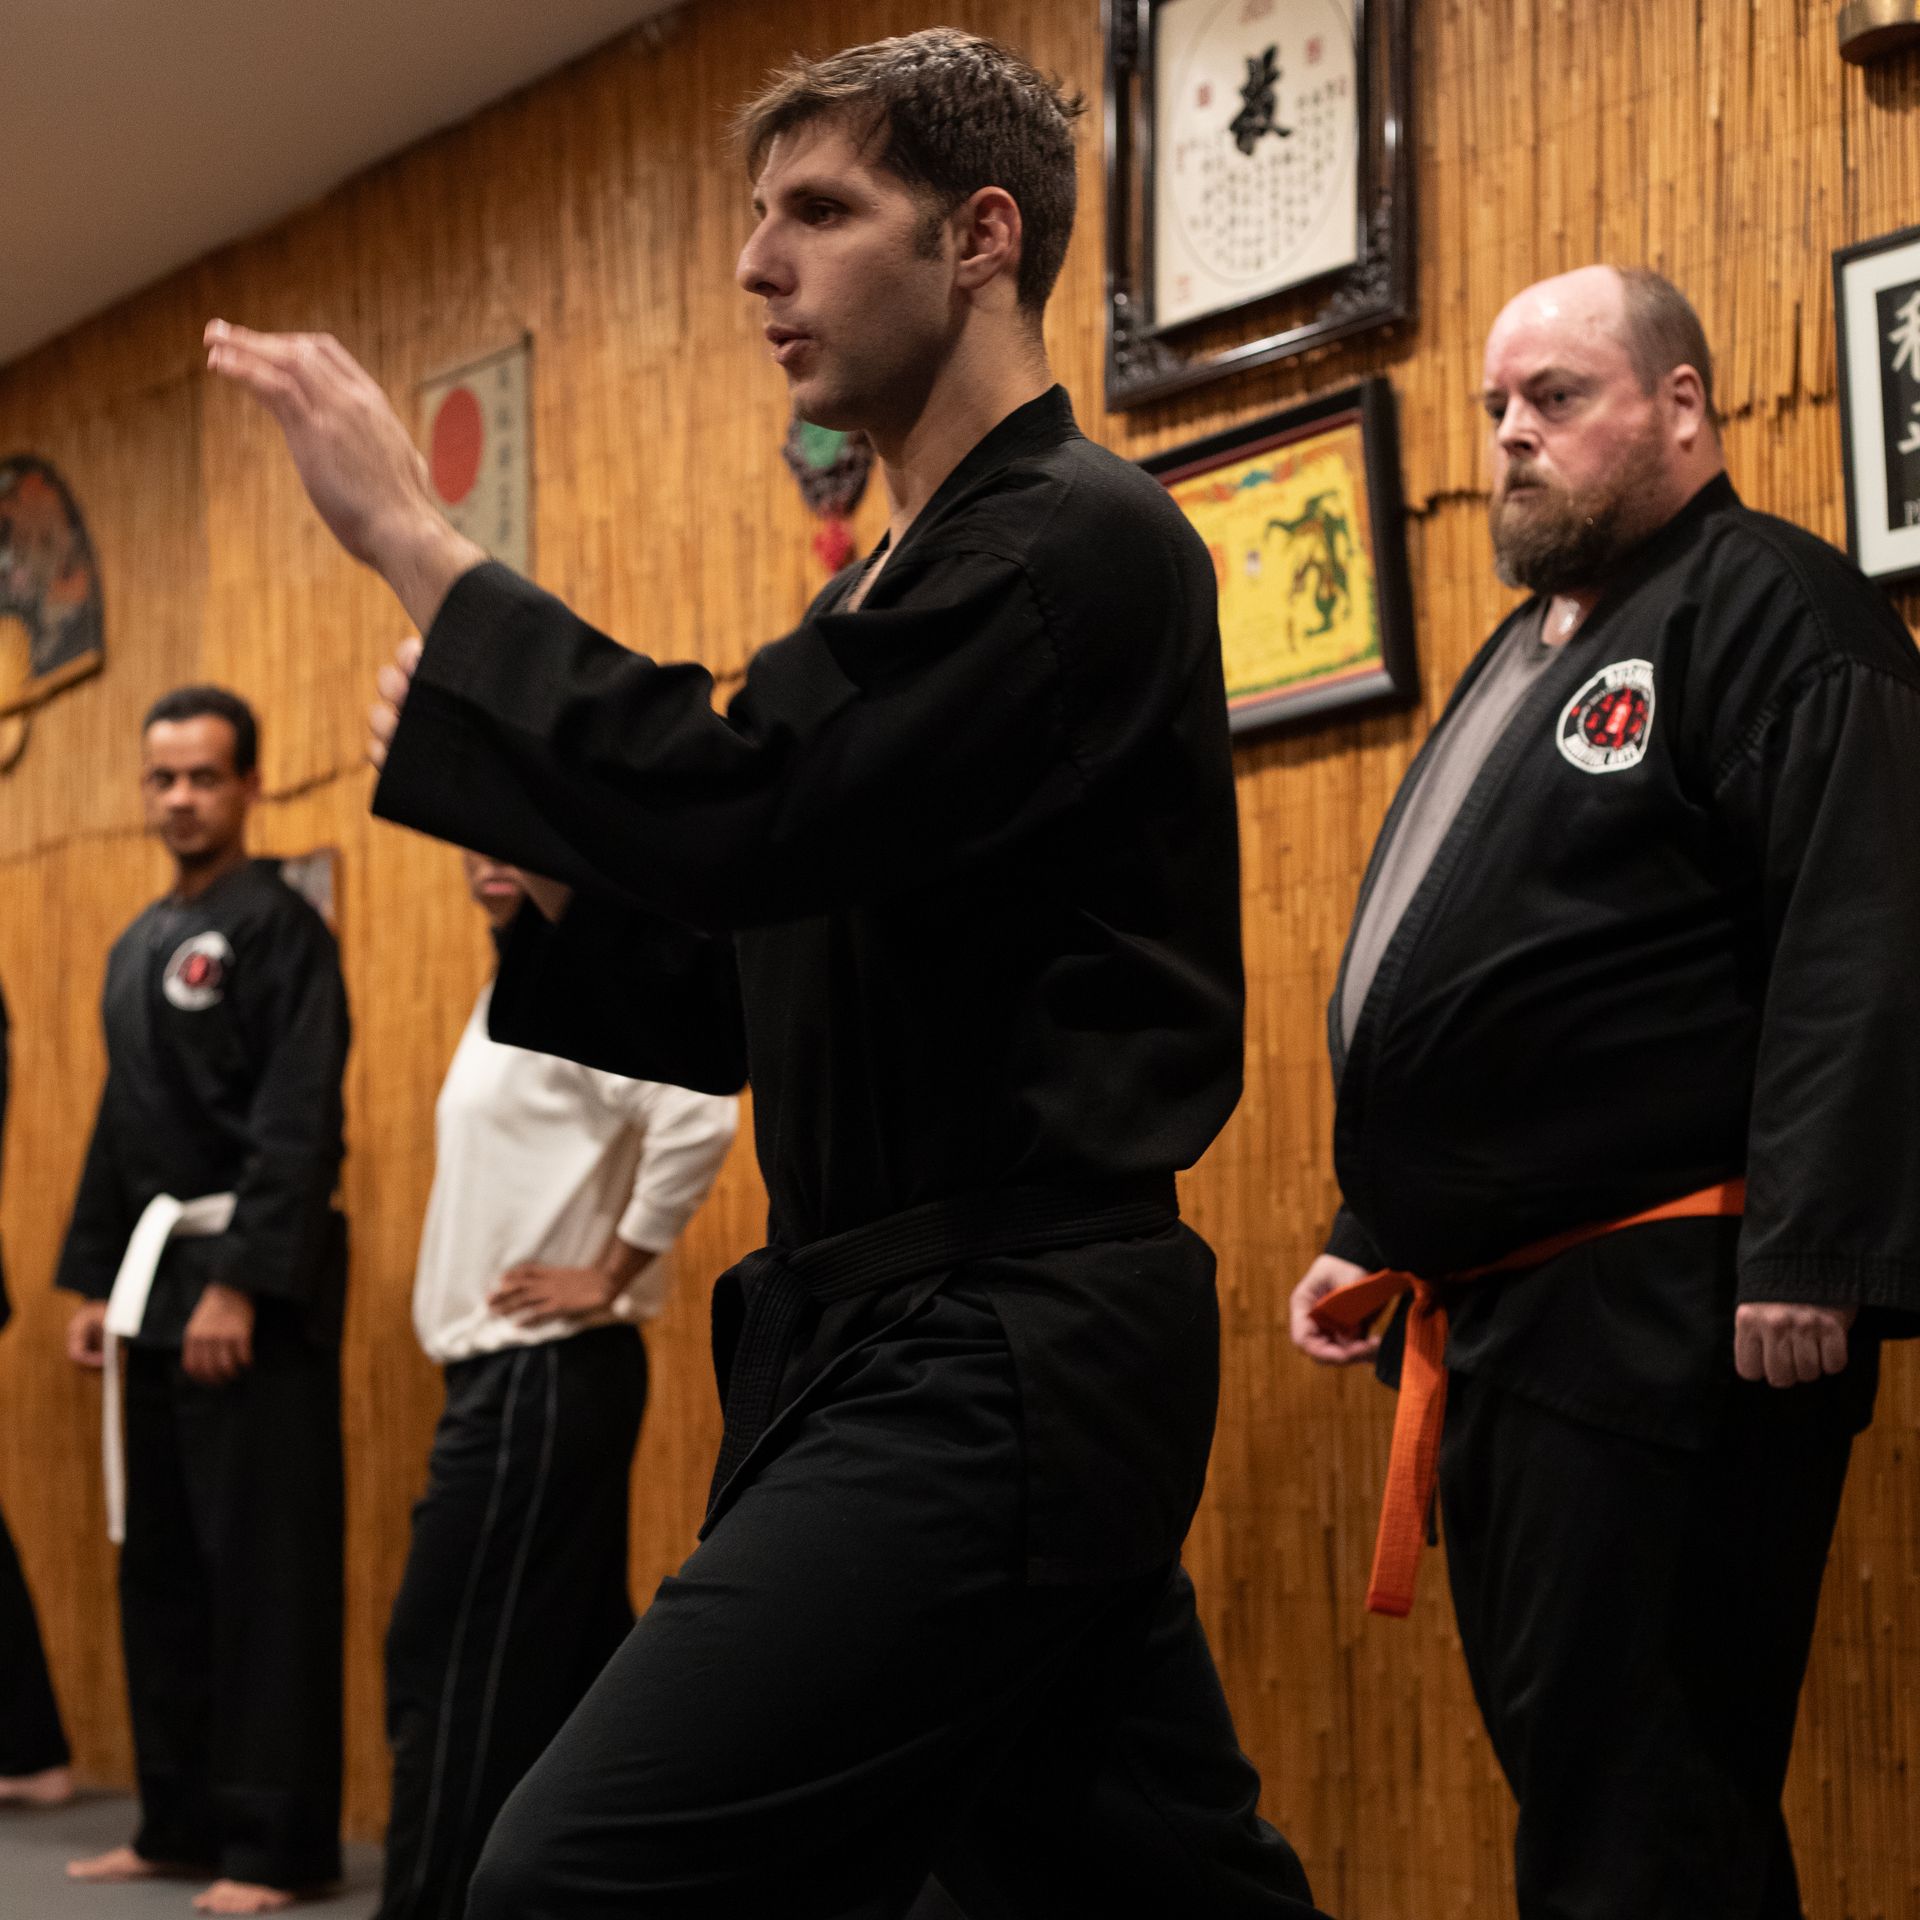 a group of men are practicing karate in a gym